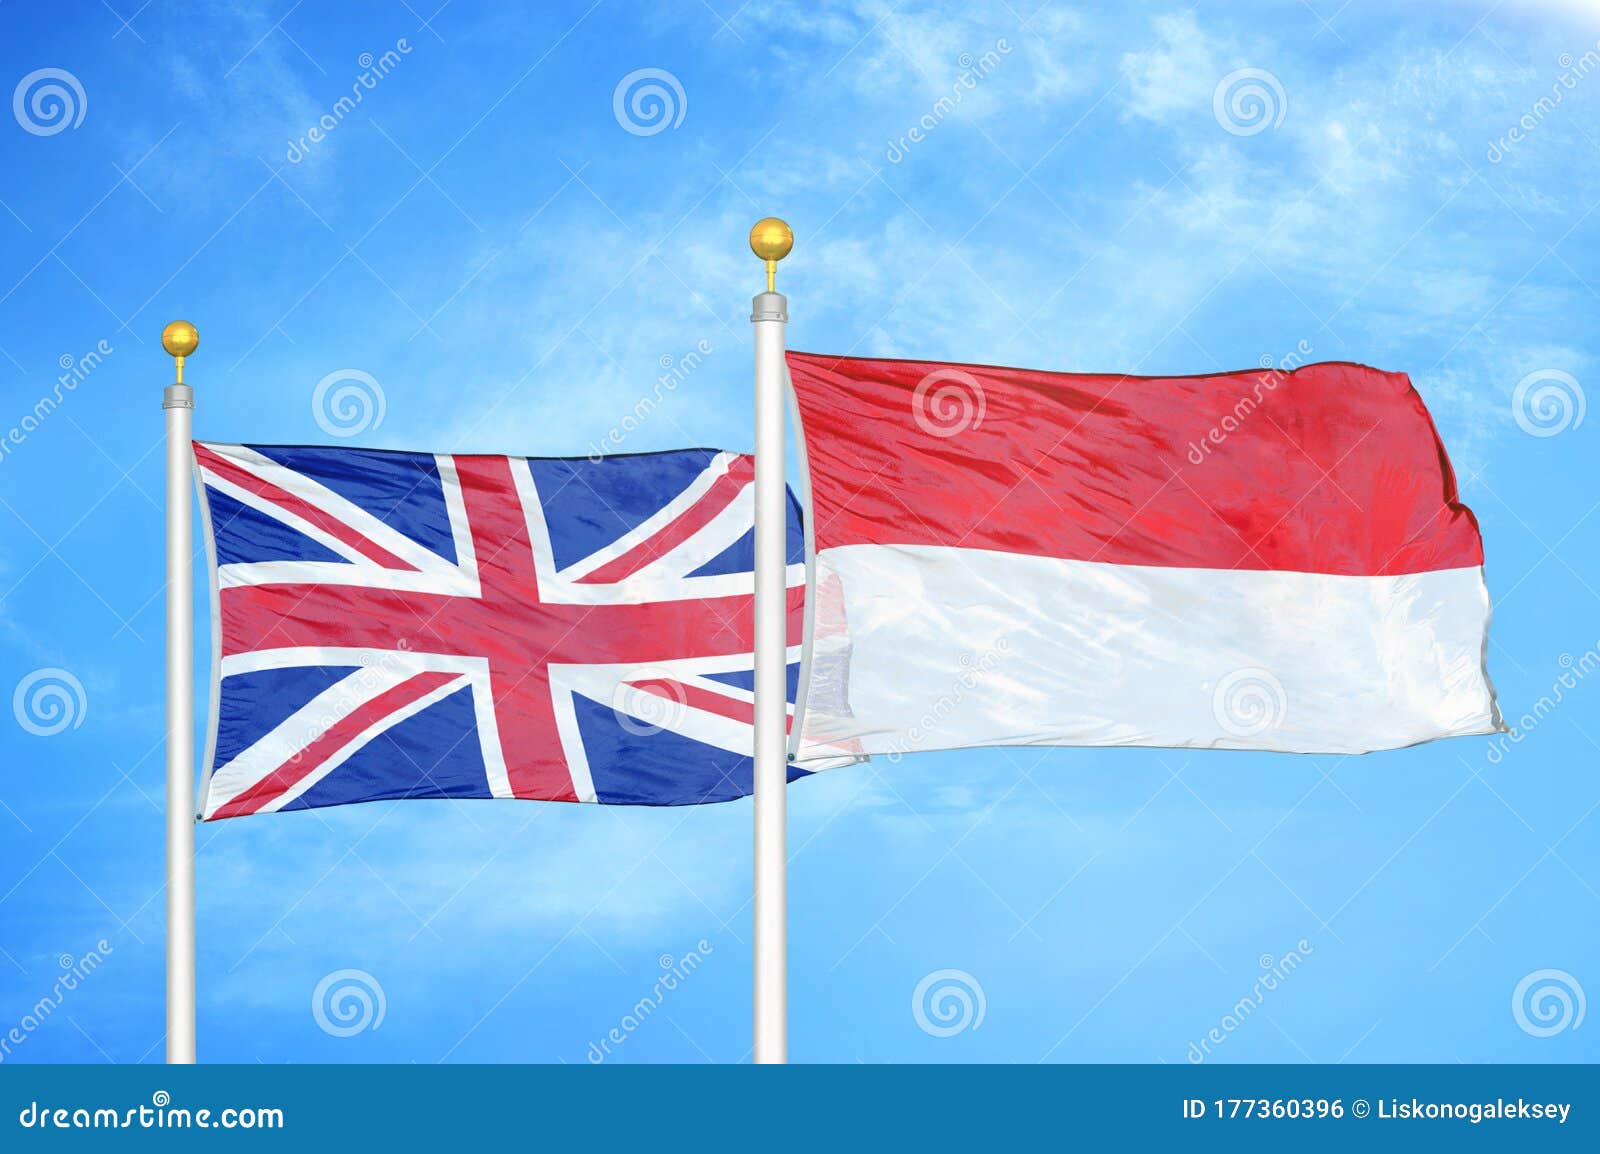 United Kingdom And Indonesia Two Flags On Flagpoles And Blue Cloudy Sky Stock Photo Image Of Cloud Conflict